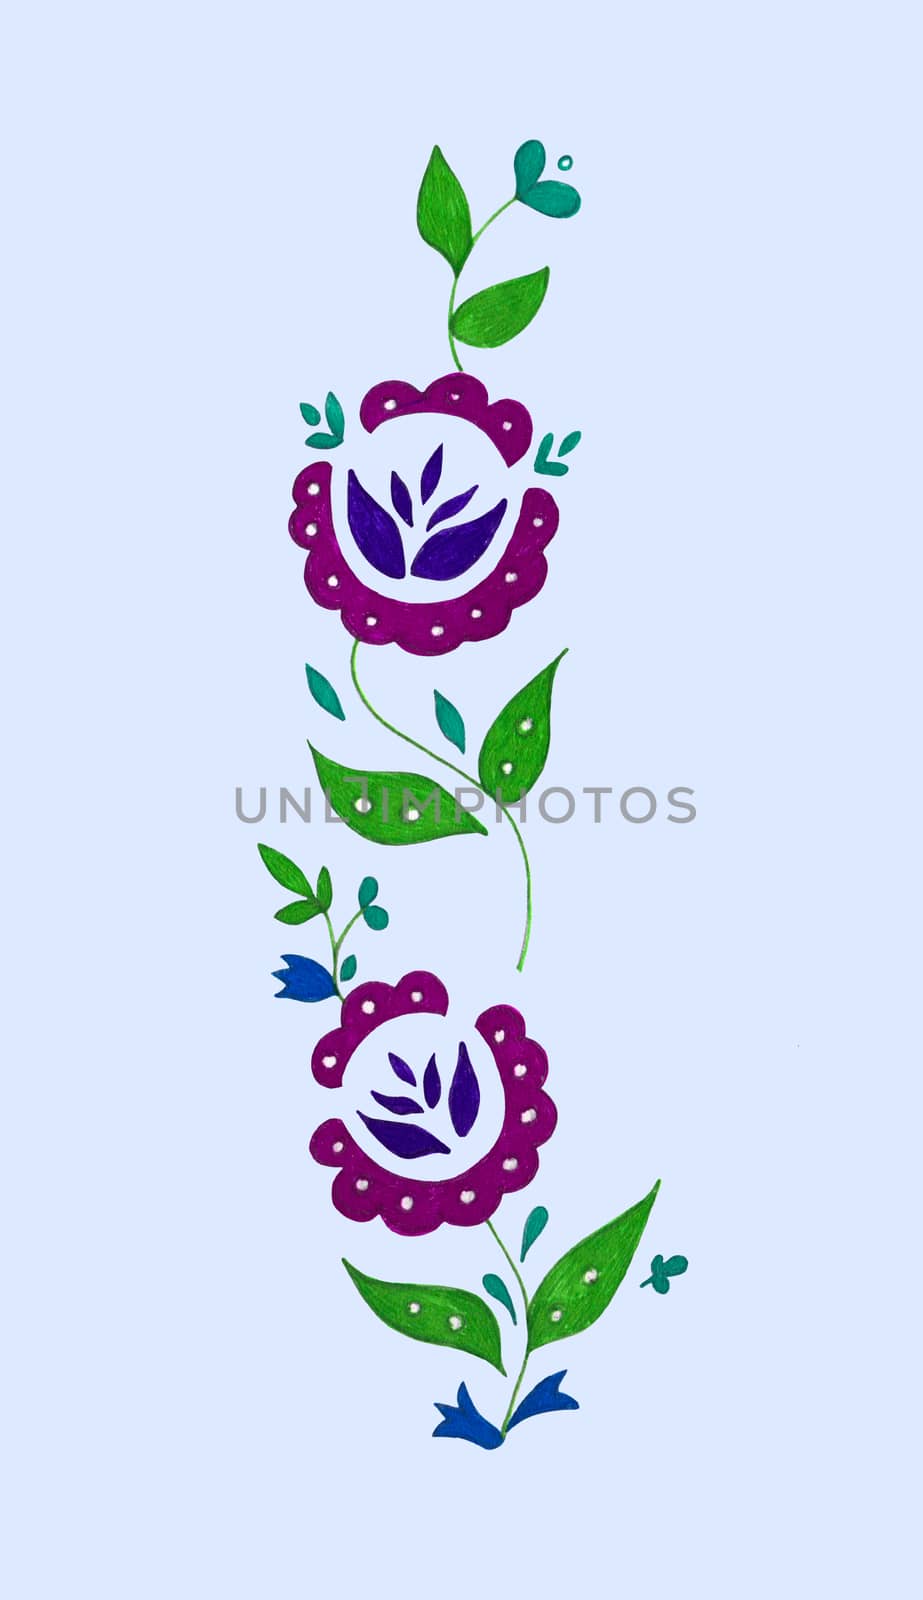 Decorative composition of abstract doodle flowers and leaves. Floral motif illustration. Design element. Hand drawn vertical ornament isolated on light blue background